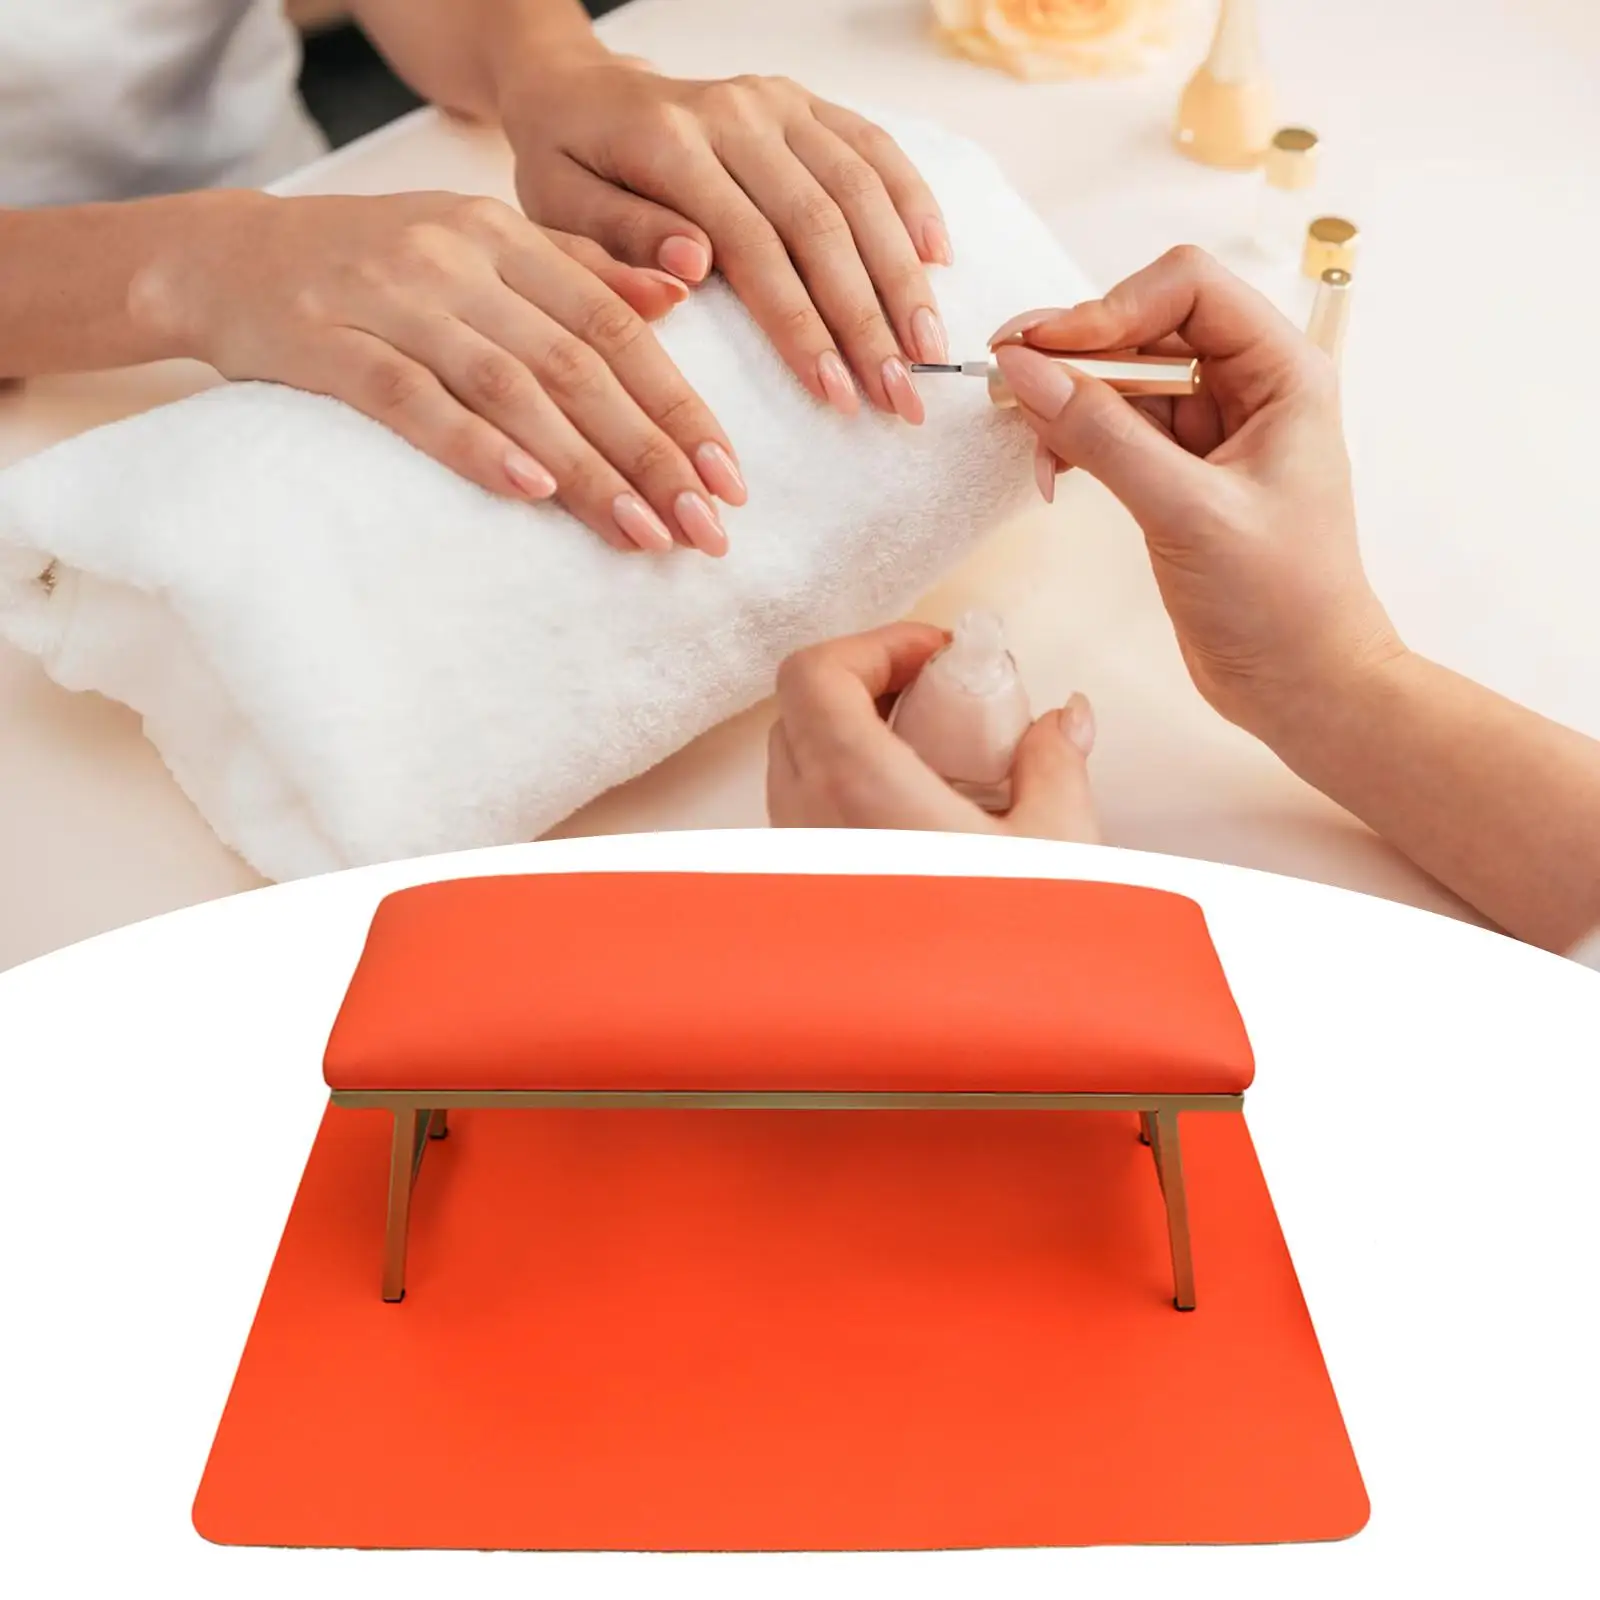 Nail Pillow and Mat Arm Rest for Nails for Salon Home Nail Techs Use